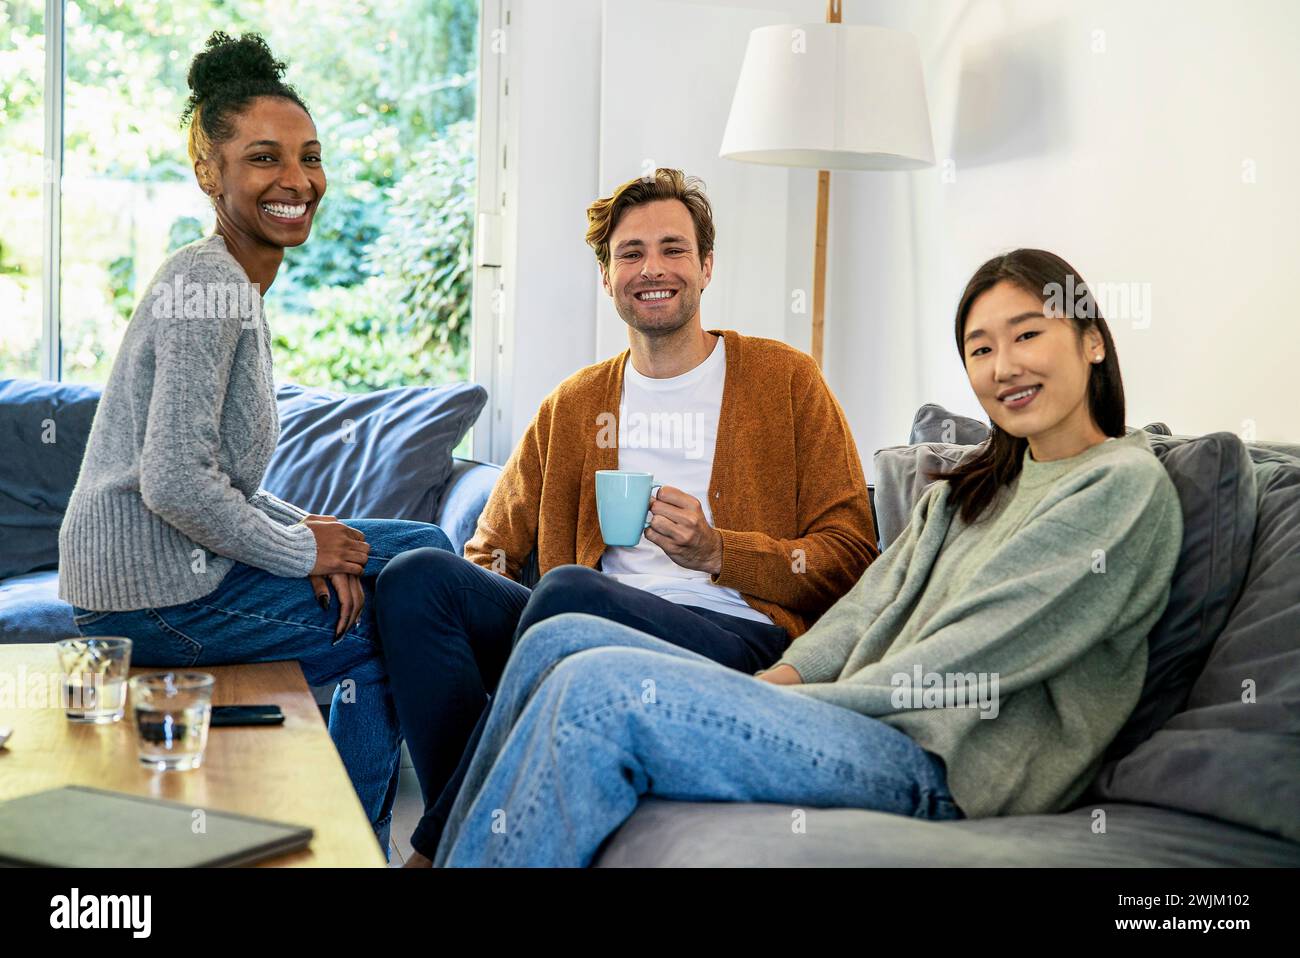 Small group of friends gathered in living room looking at the camera Stock Photo